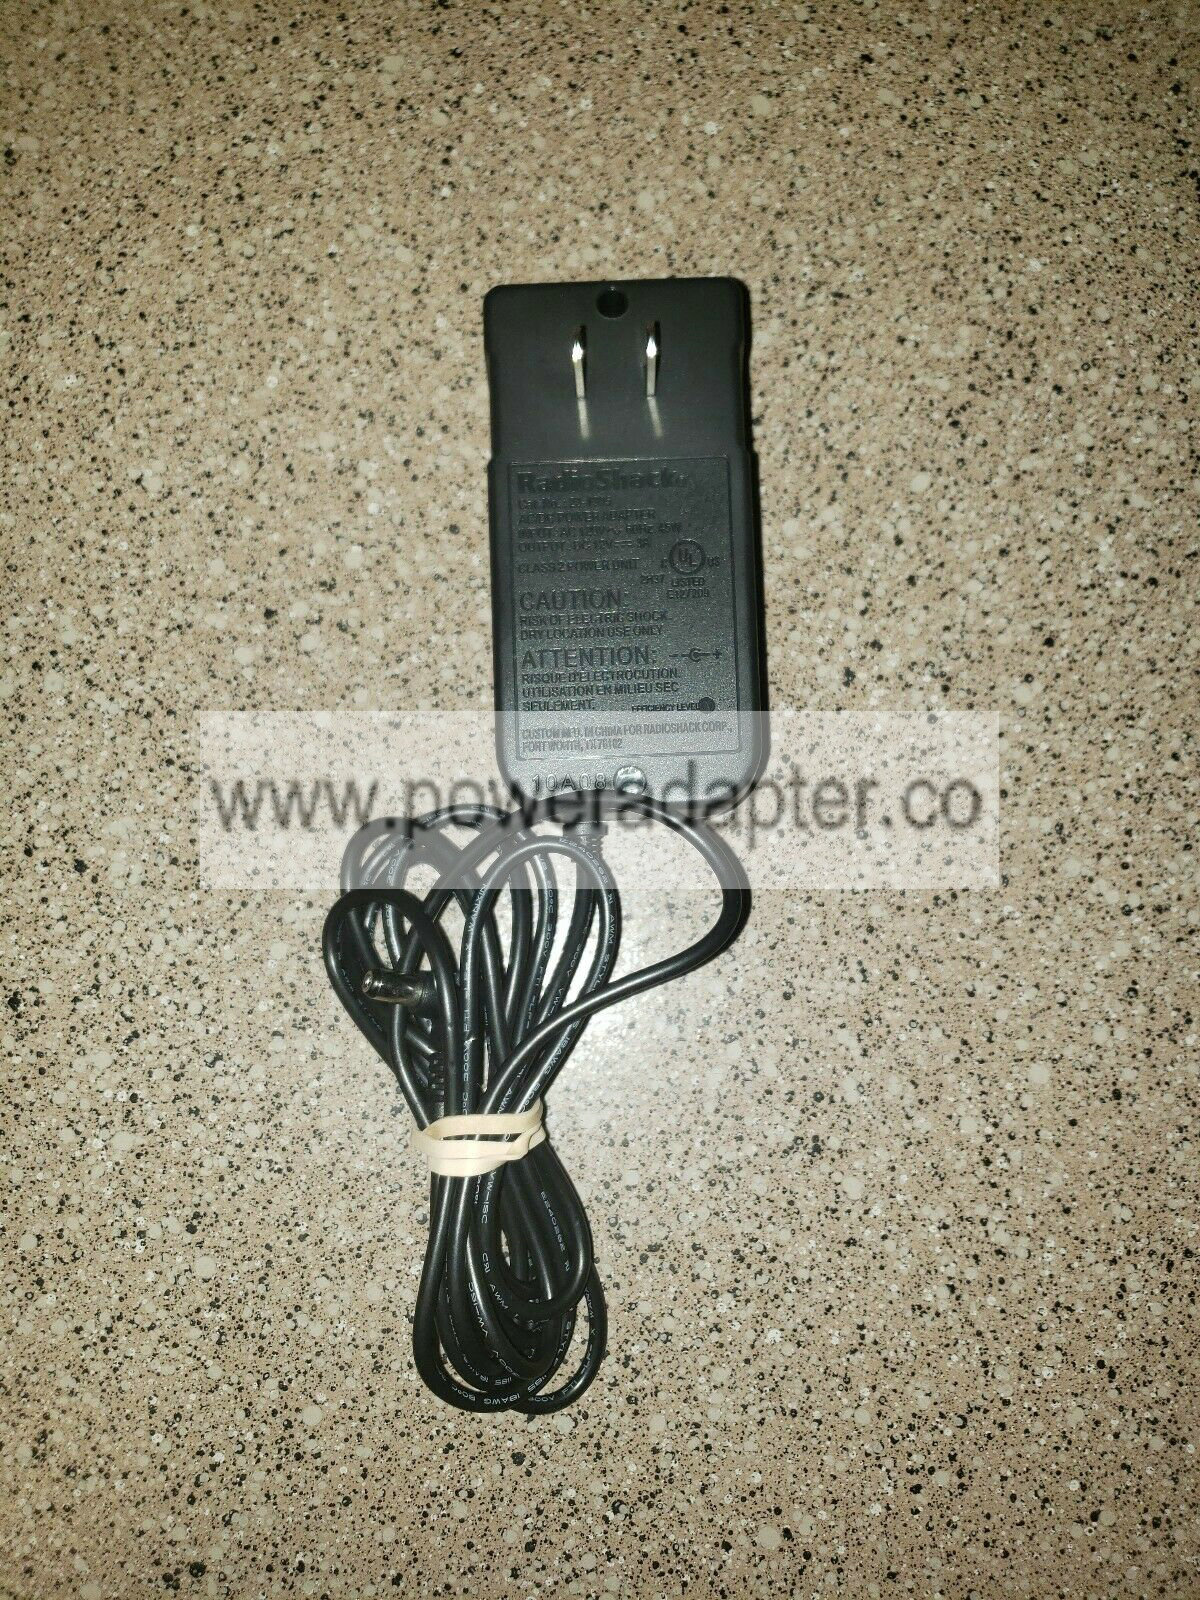 Radio Shack AC Adapter DC 12v 3A Cat No: 23-1305 This is a new Radio Shack AC/DC Adapter 12v. It has been tested with